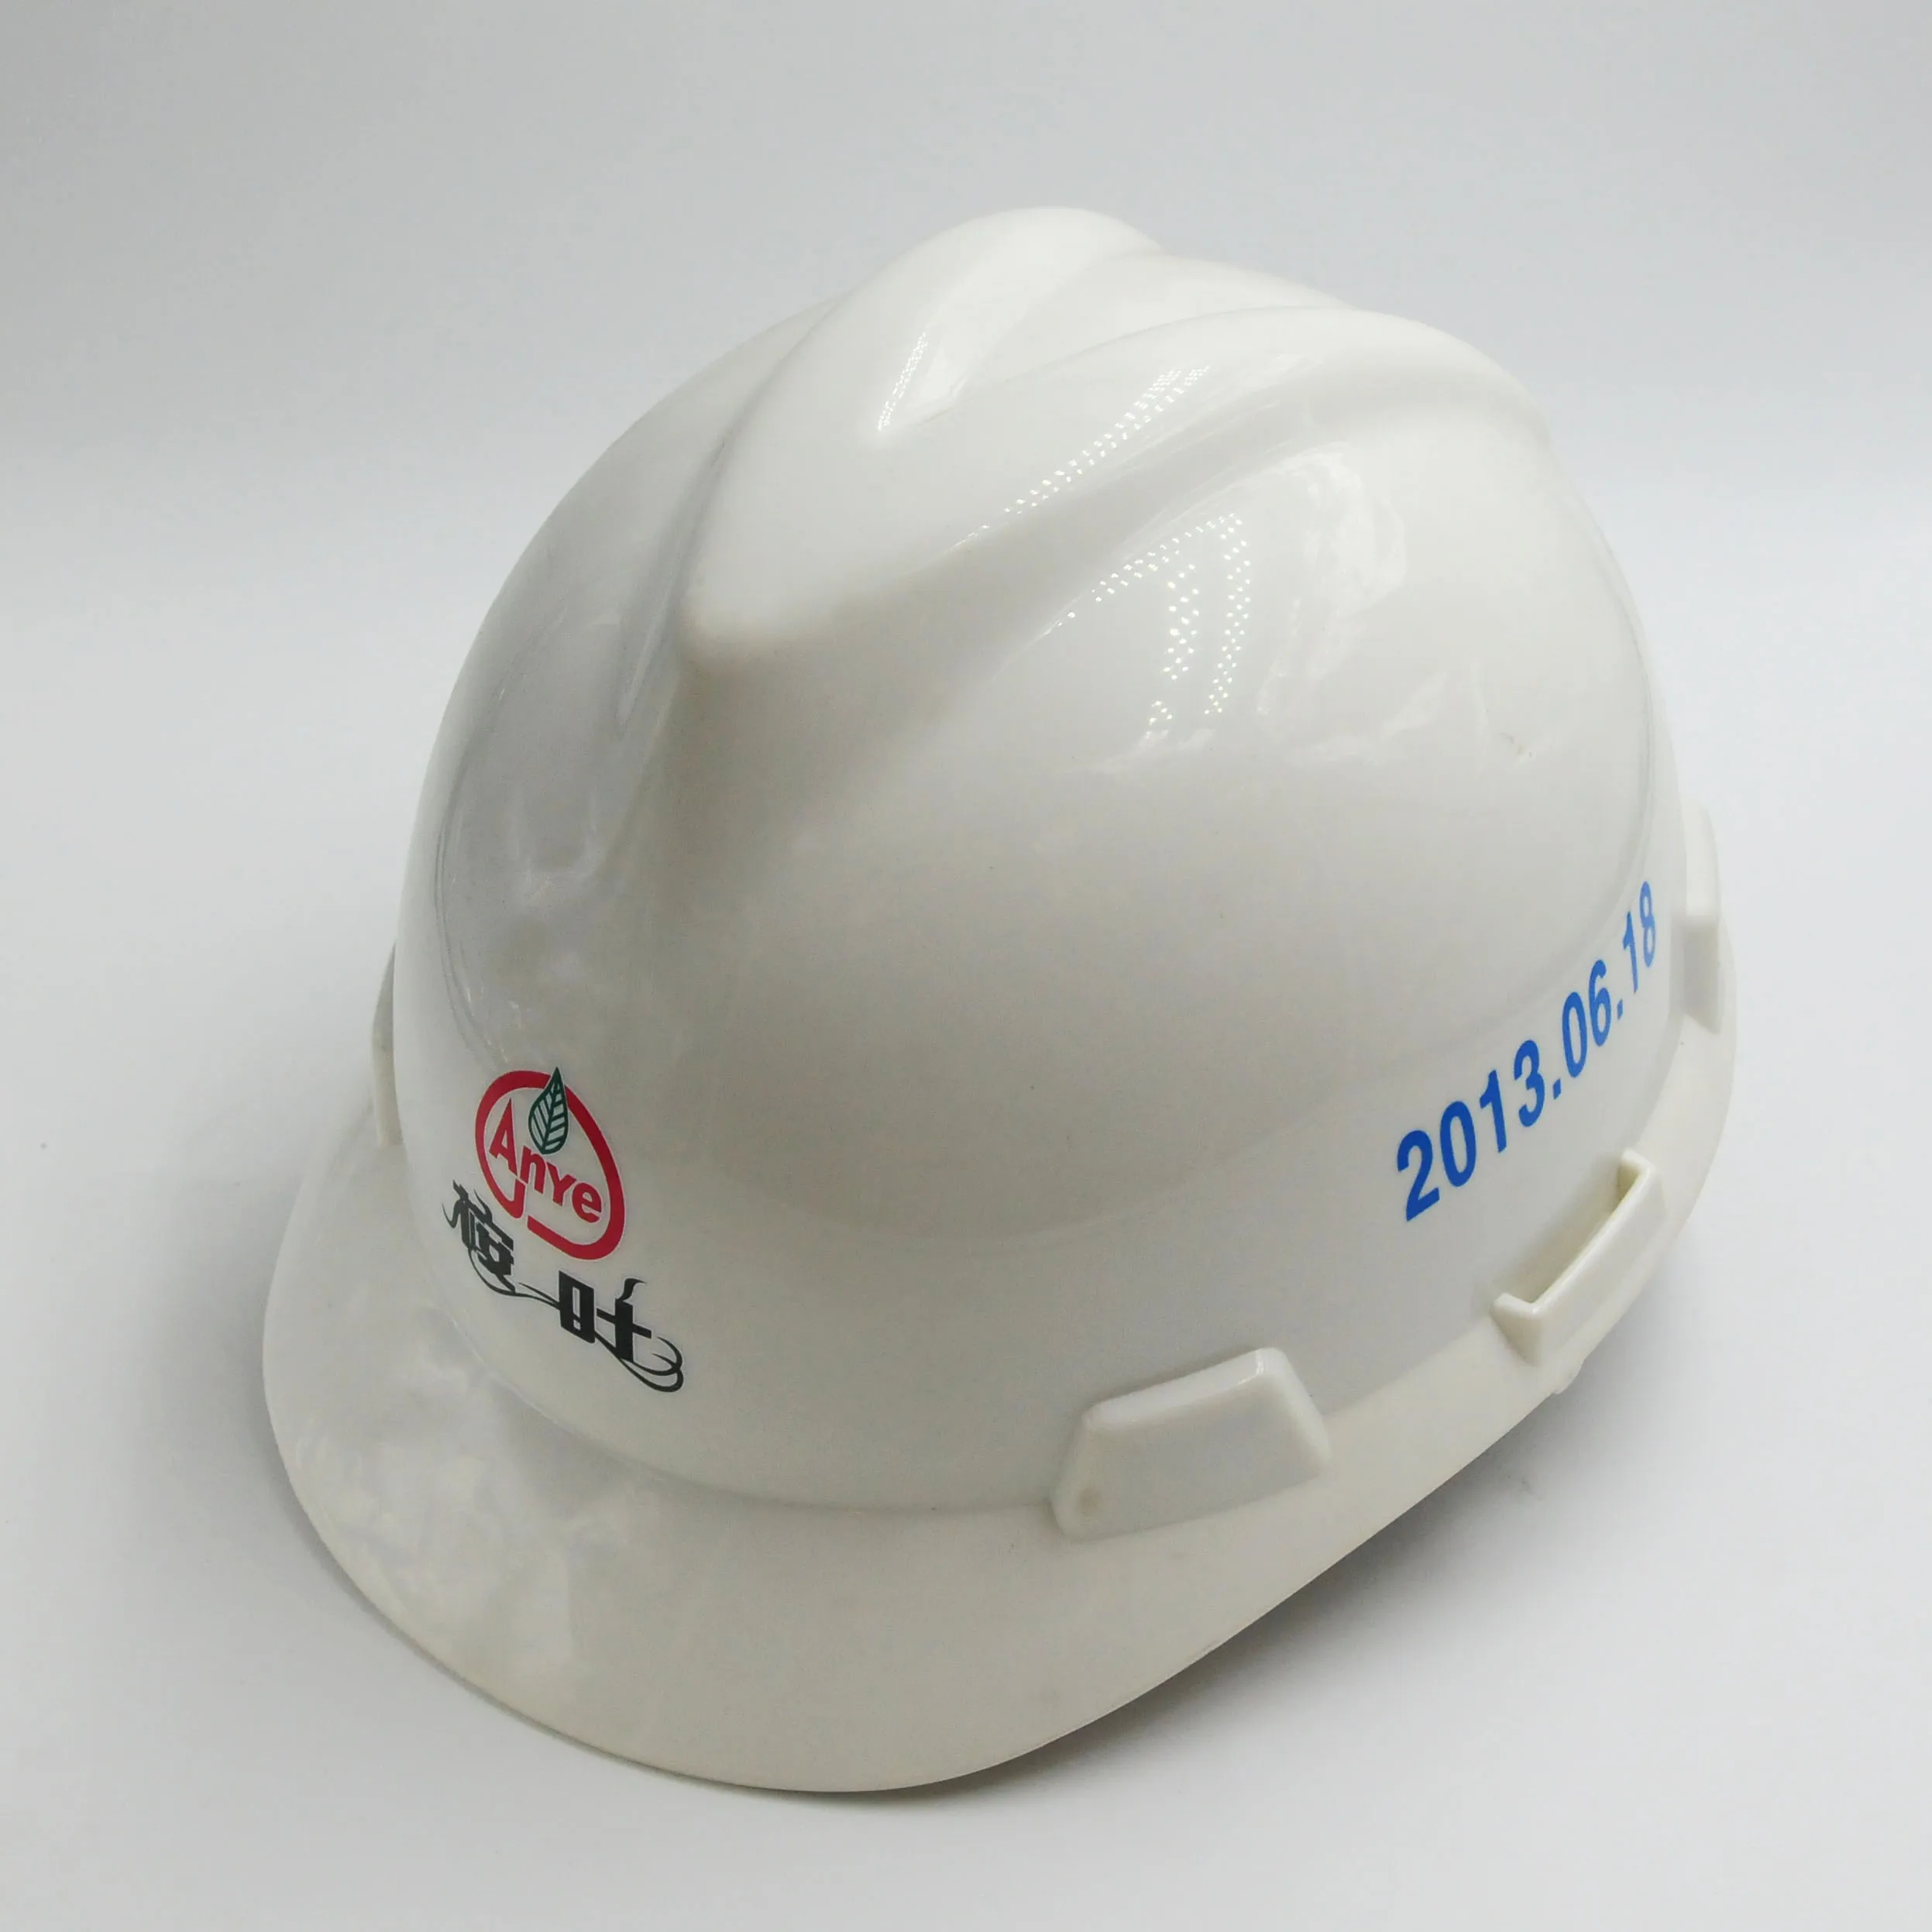 Best Selling Engineering Helmet Abs Industrial Construction Ce Safety ...